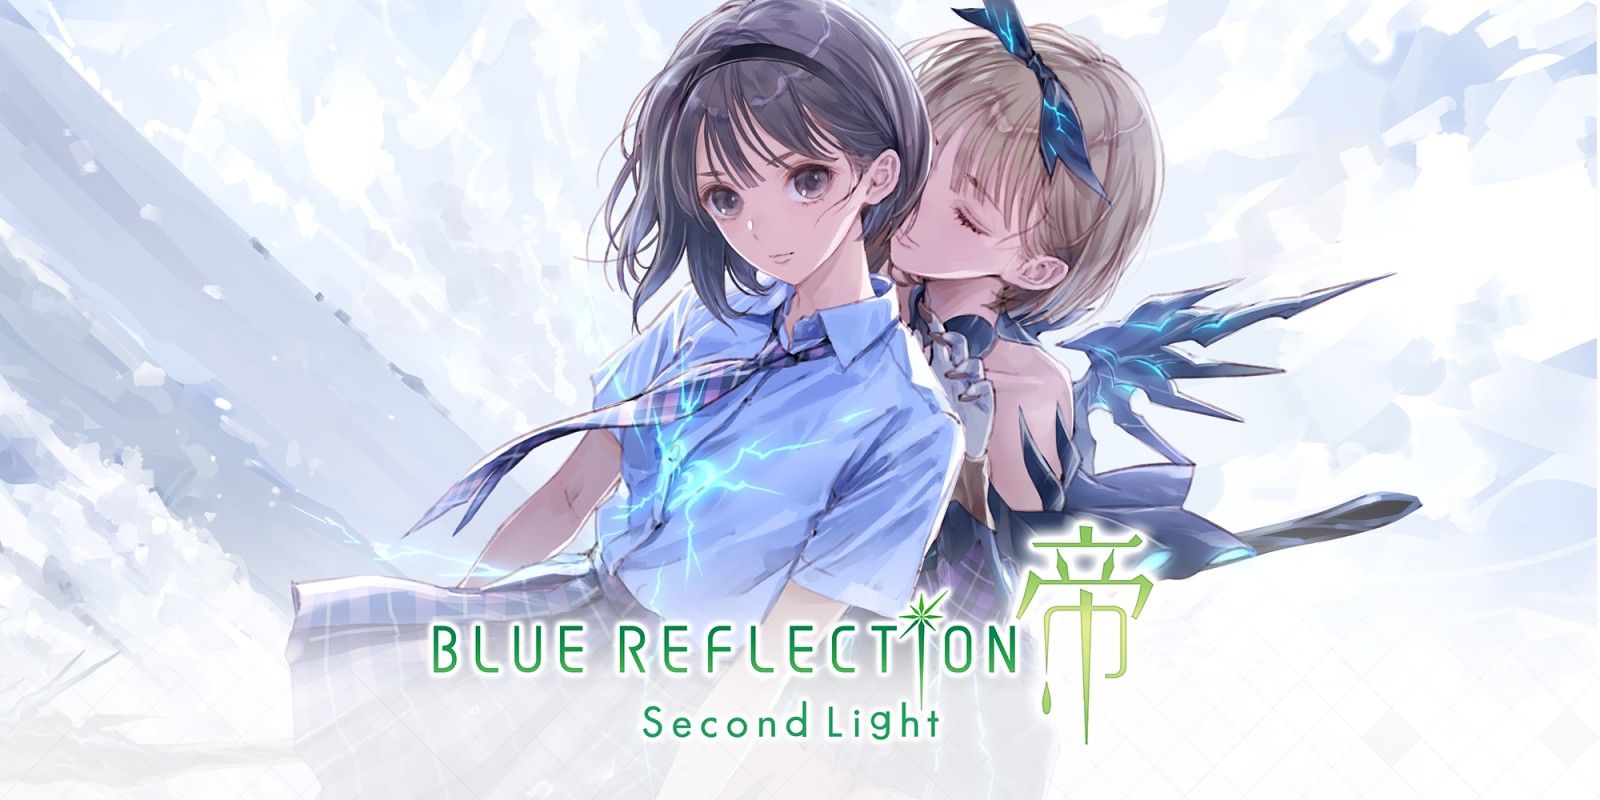 Blue Reflection: Second Light Release Time, Date And Price